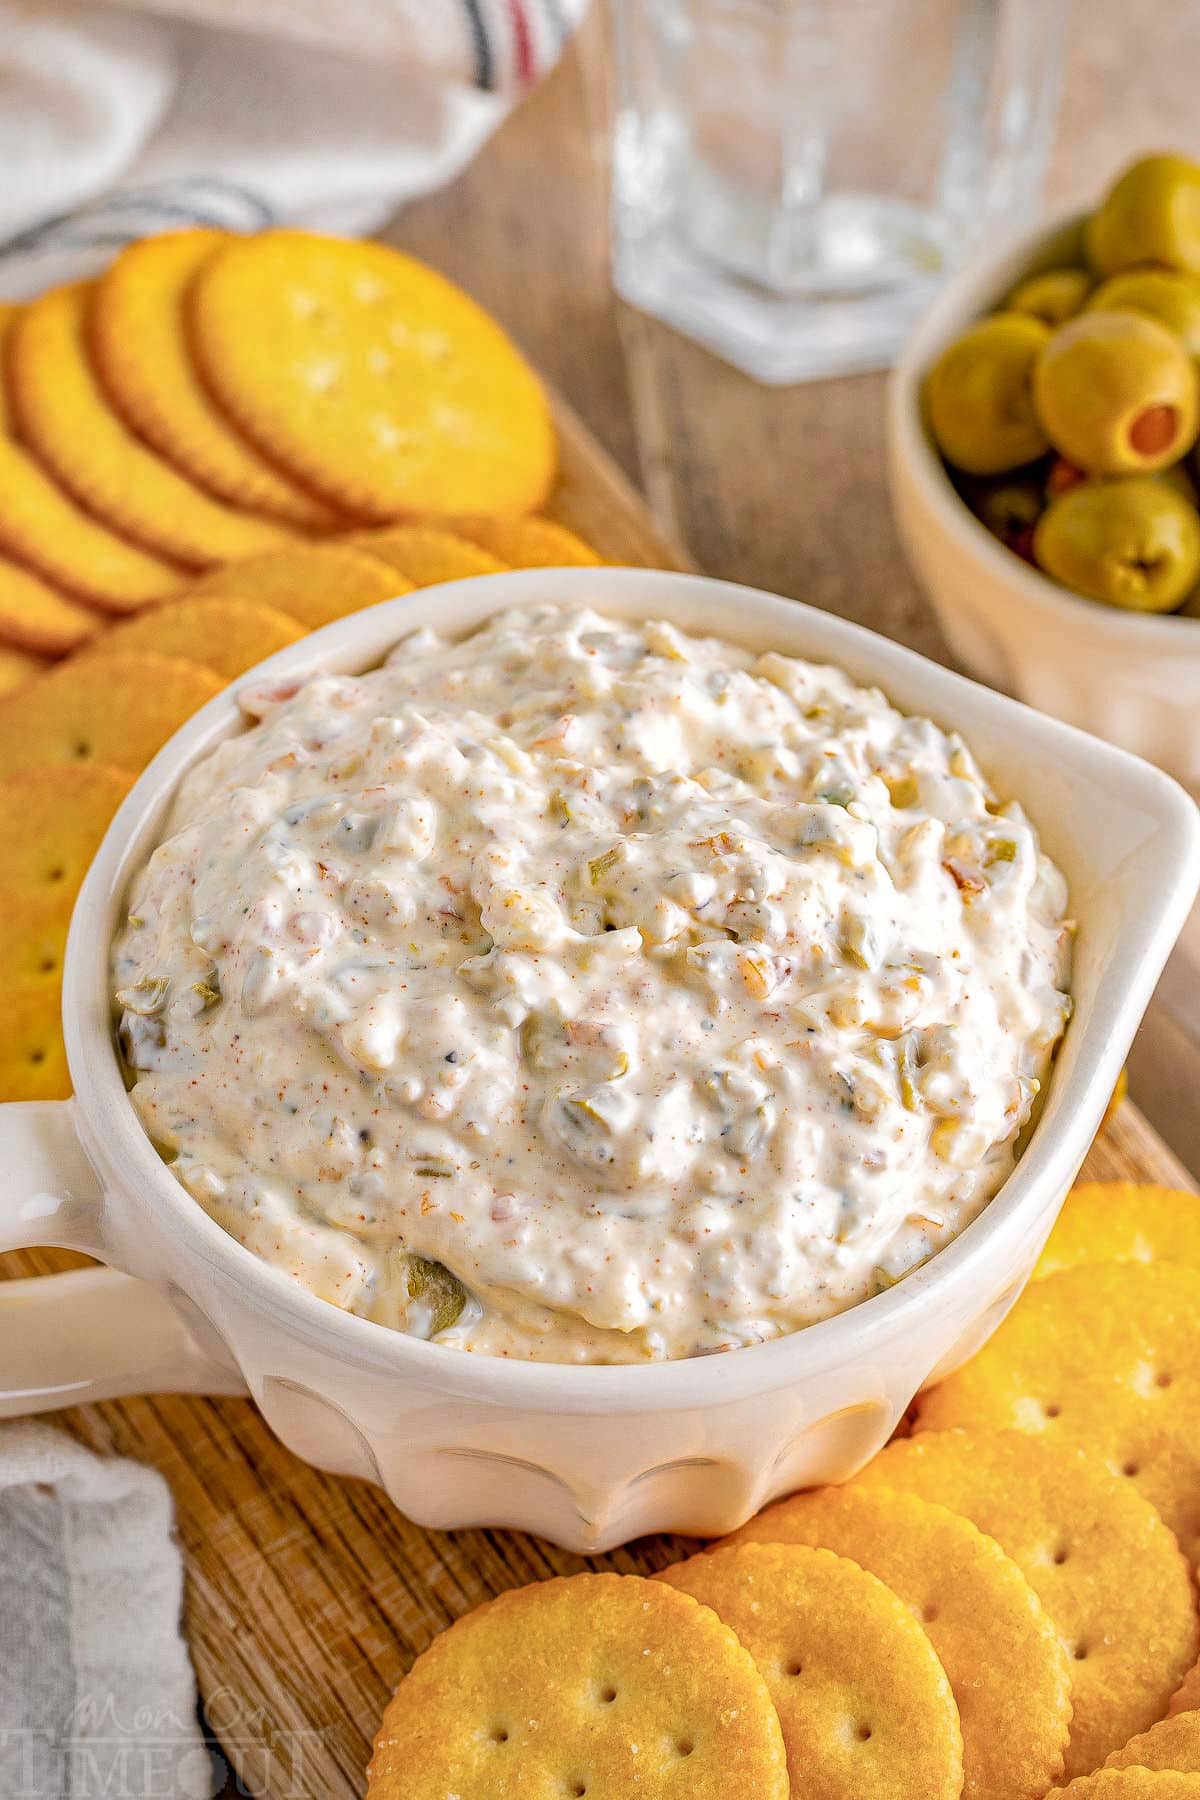 top down angled view of green olive dip in a white bowl with a handle. Ritz crackers are on a board next to the dip.